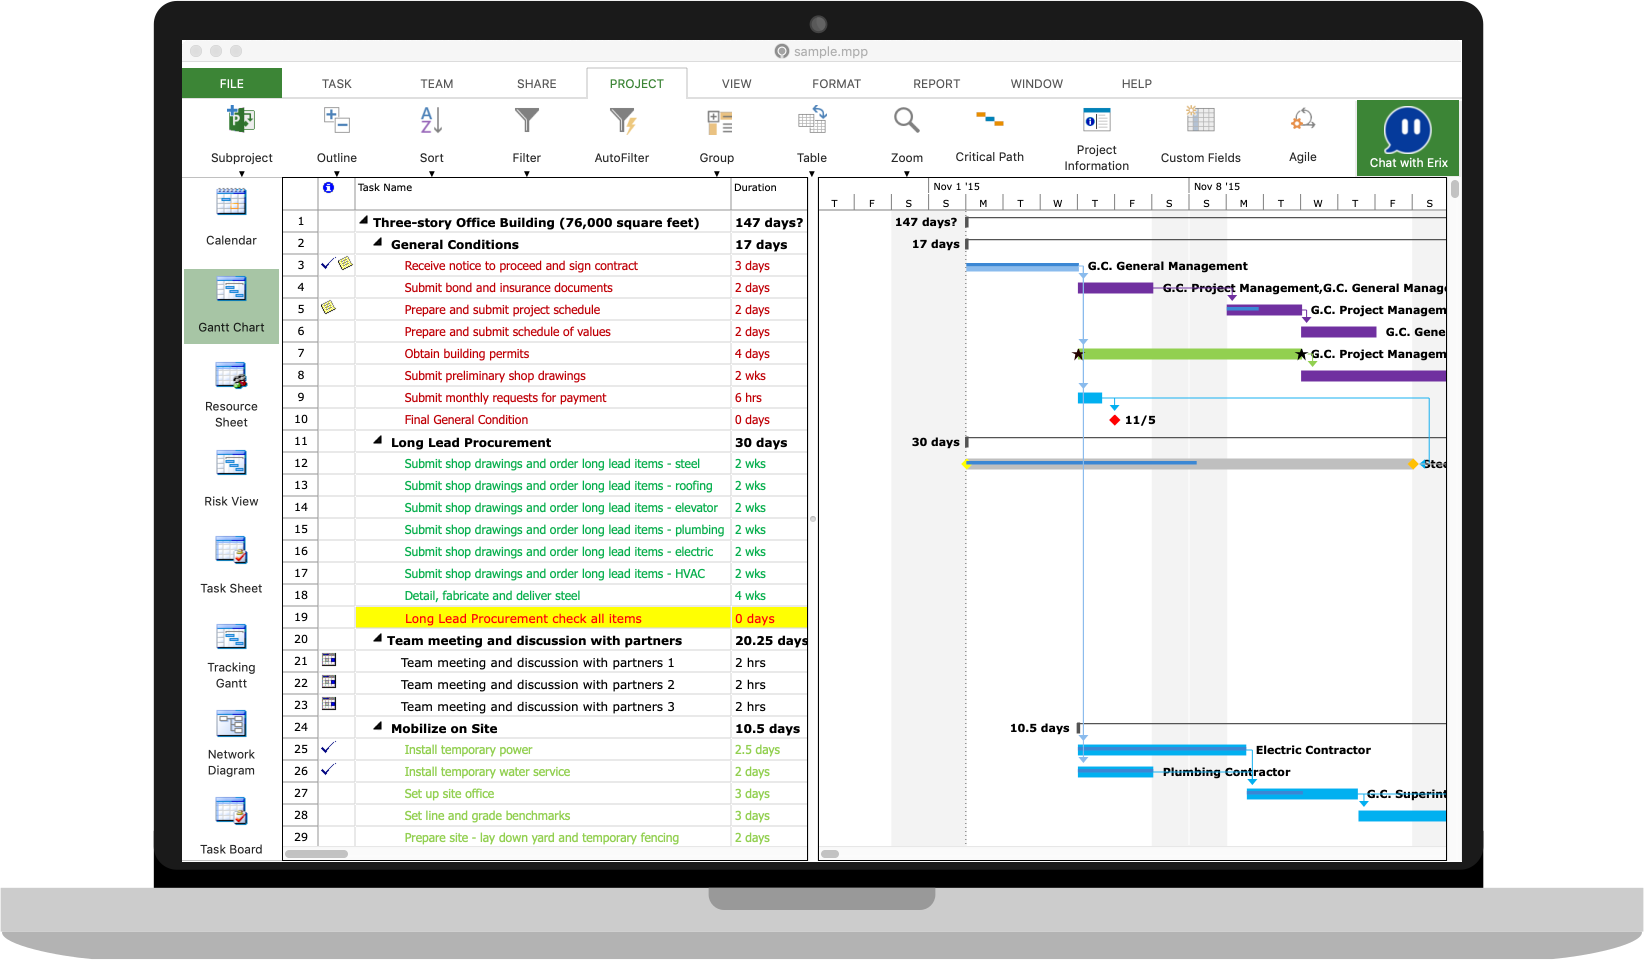 microsoft project for mac download free